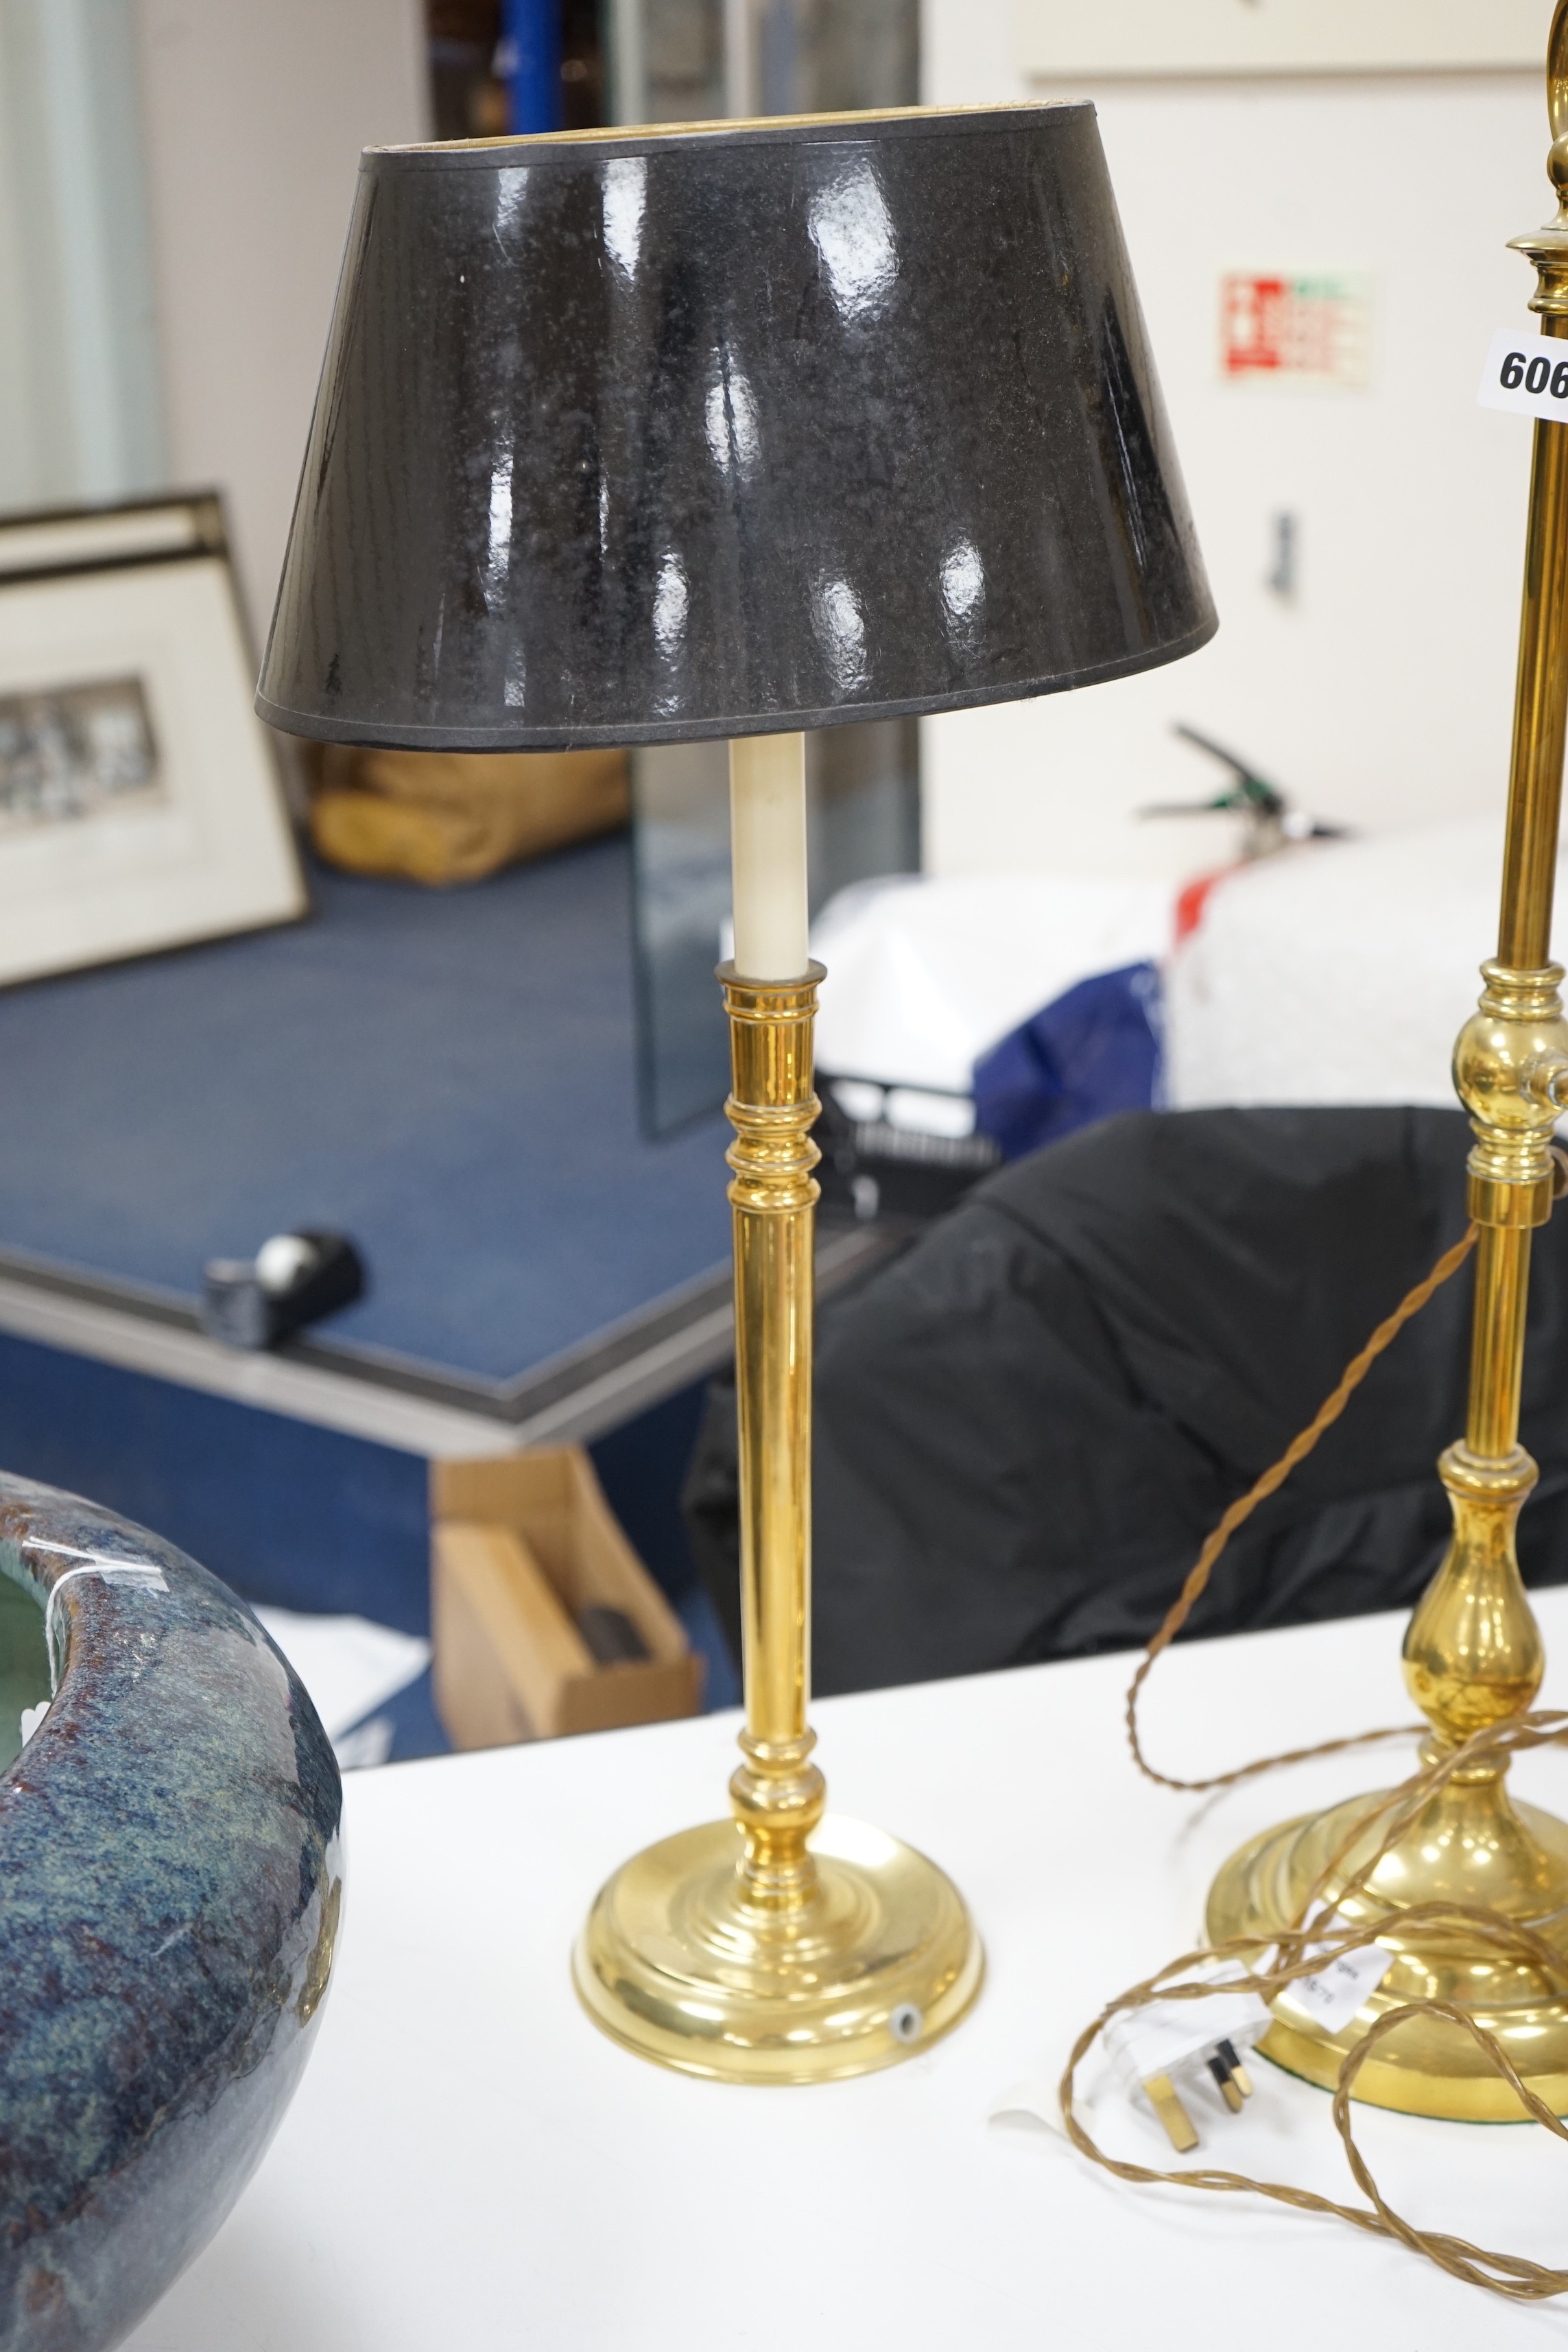 A pair of brass table lamps and another with glass shade (3)